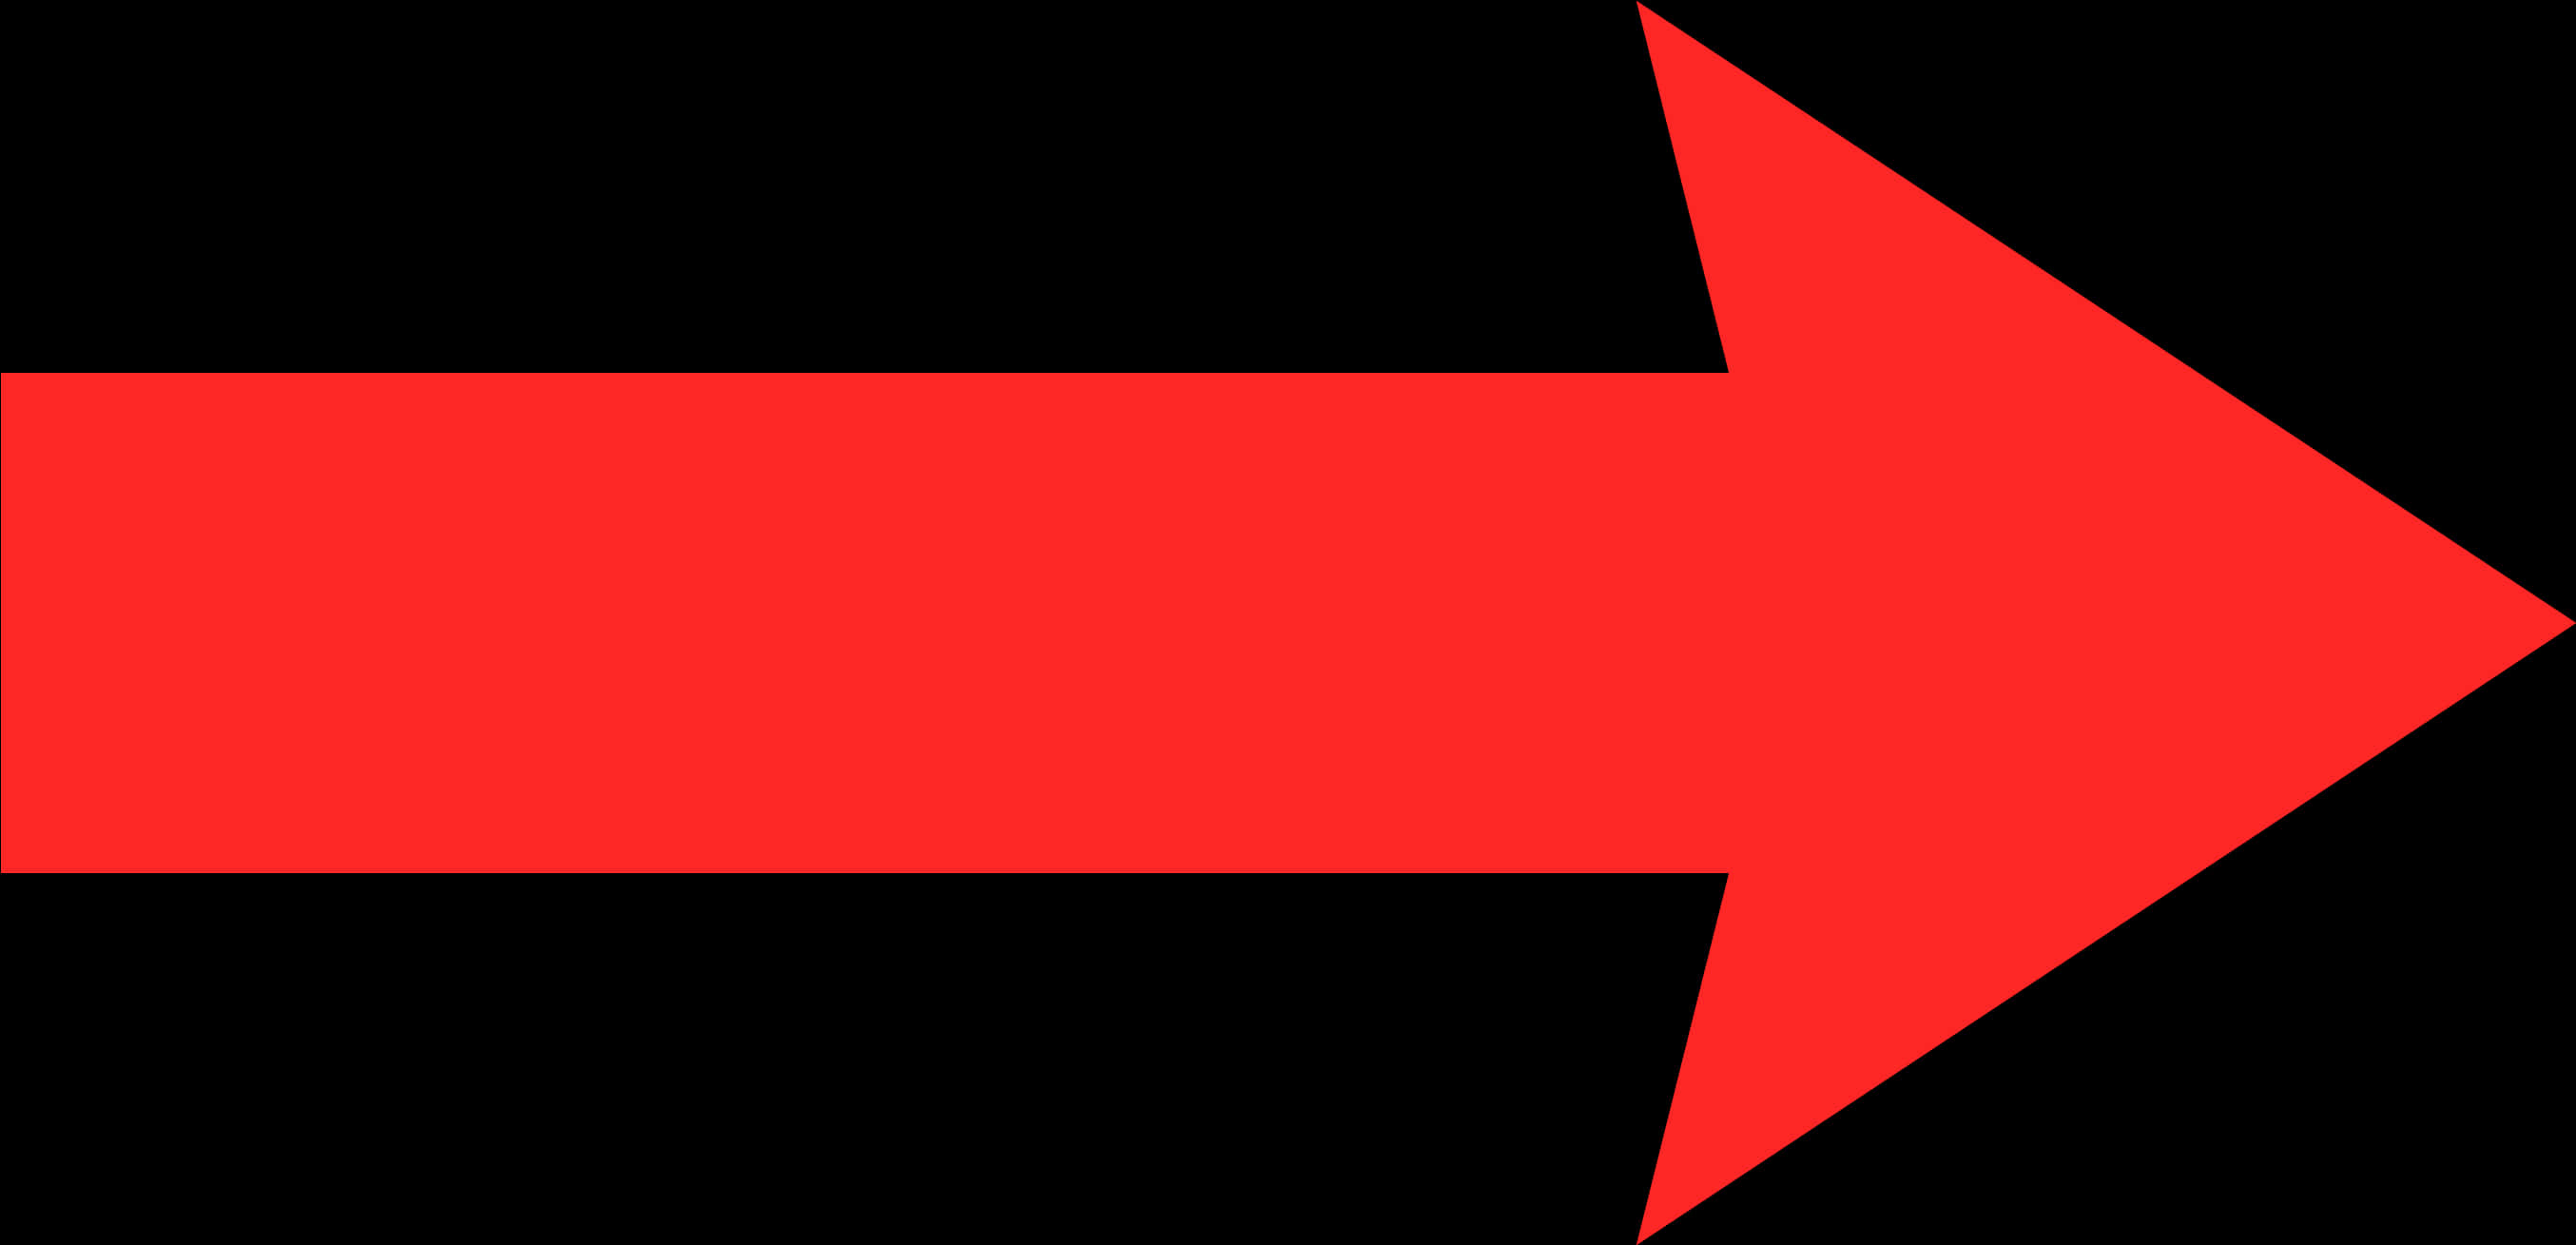 Red Arrow Graphic PNG